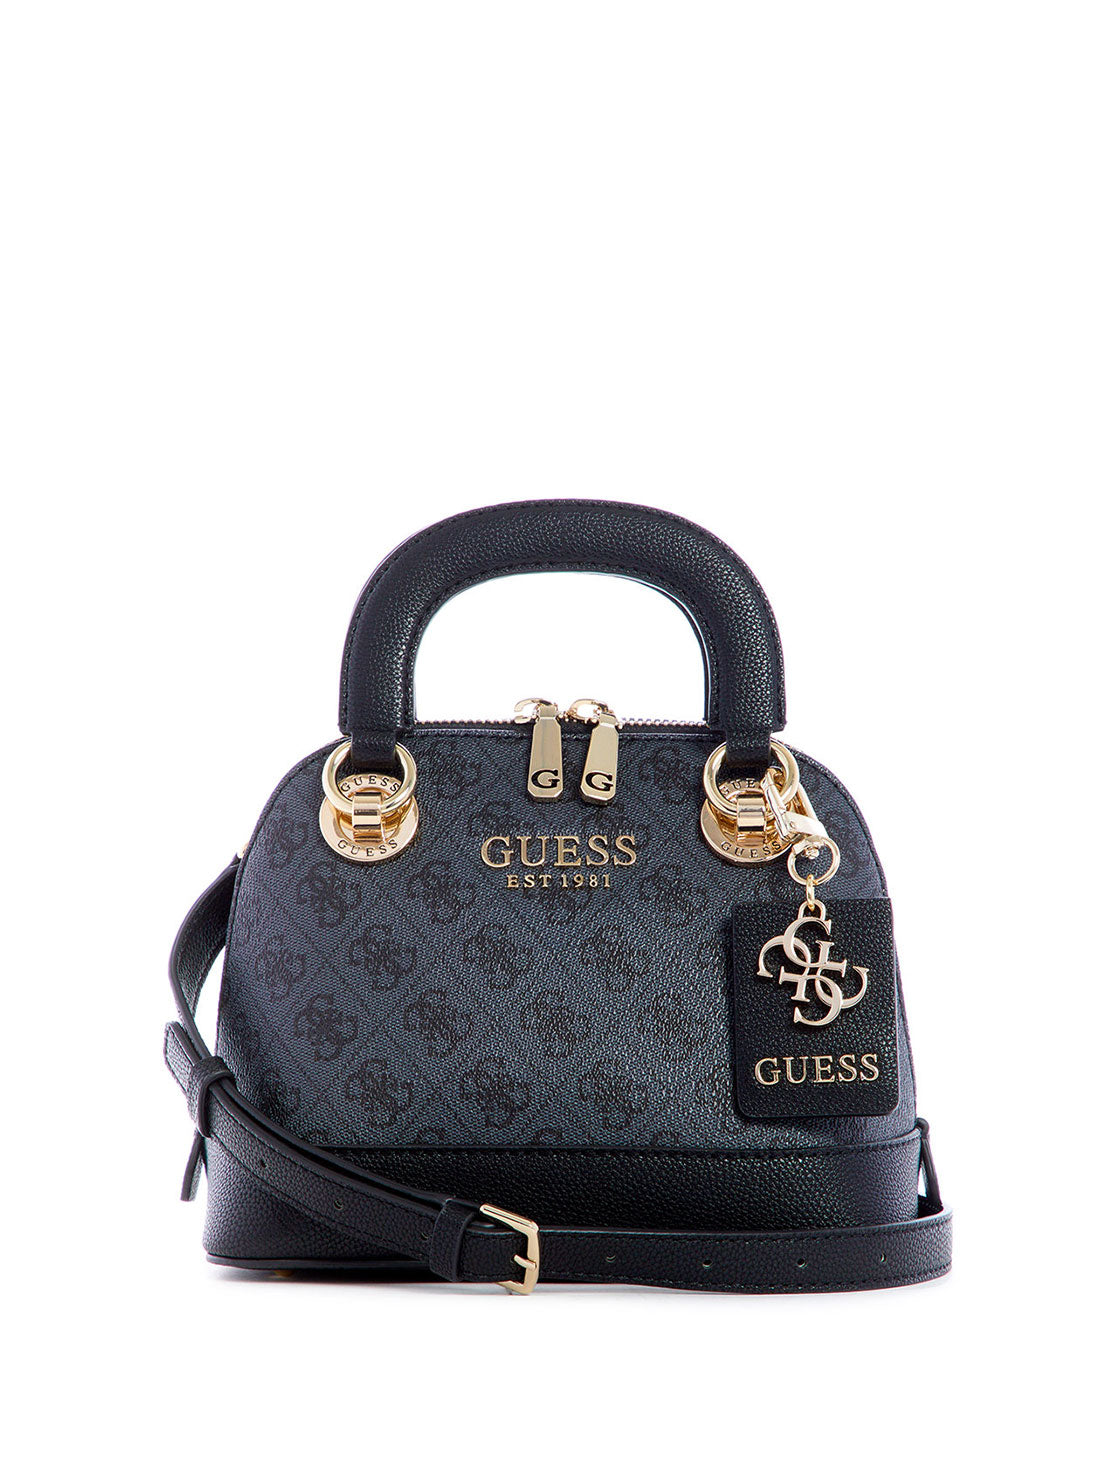 GUESS Womens Black Cathleen Small Dome Satchel SG773705 Front View